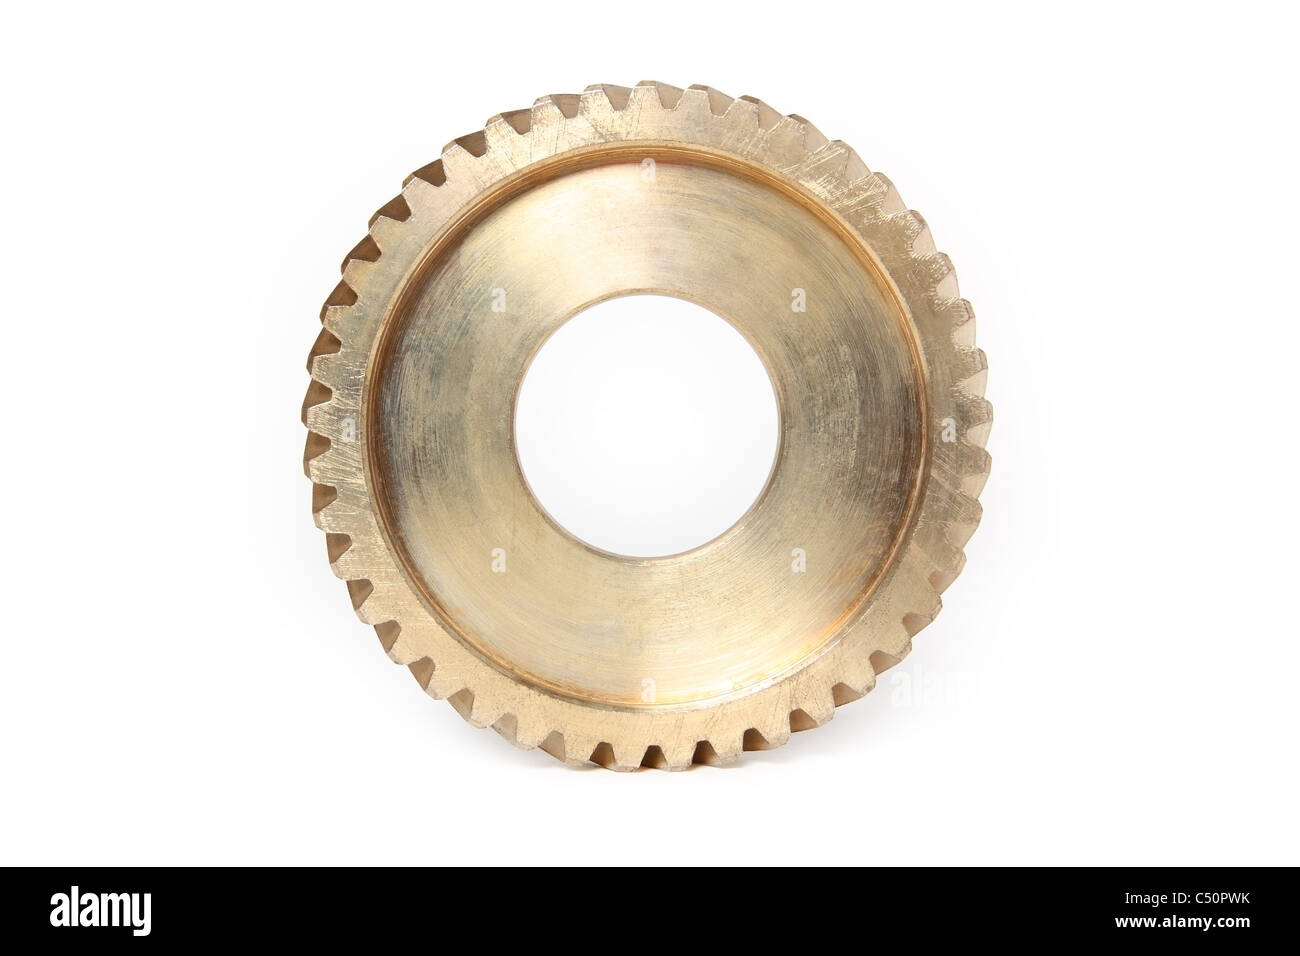 One bronze gear on a white background Stock Photo